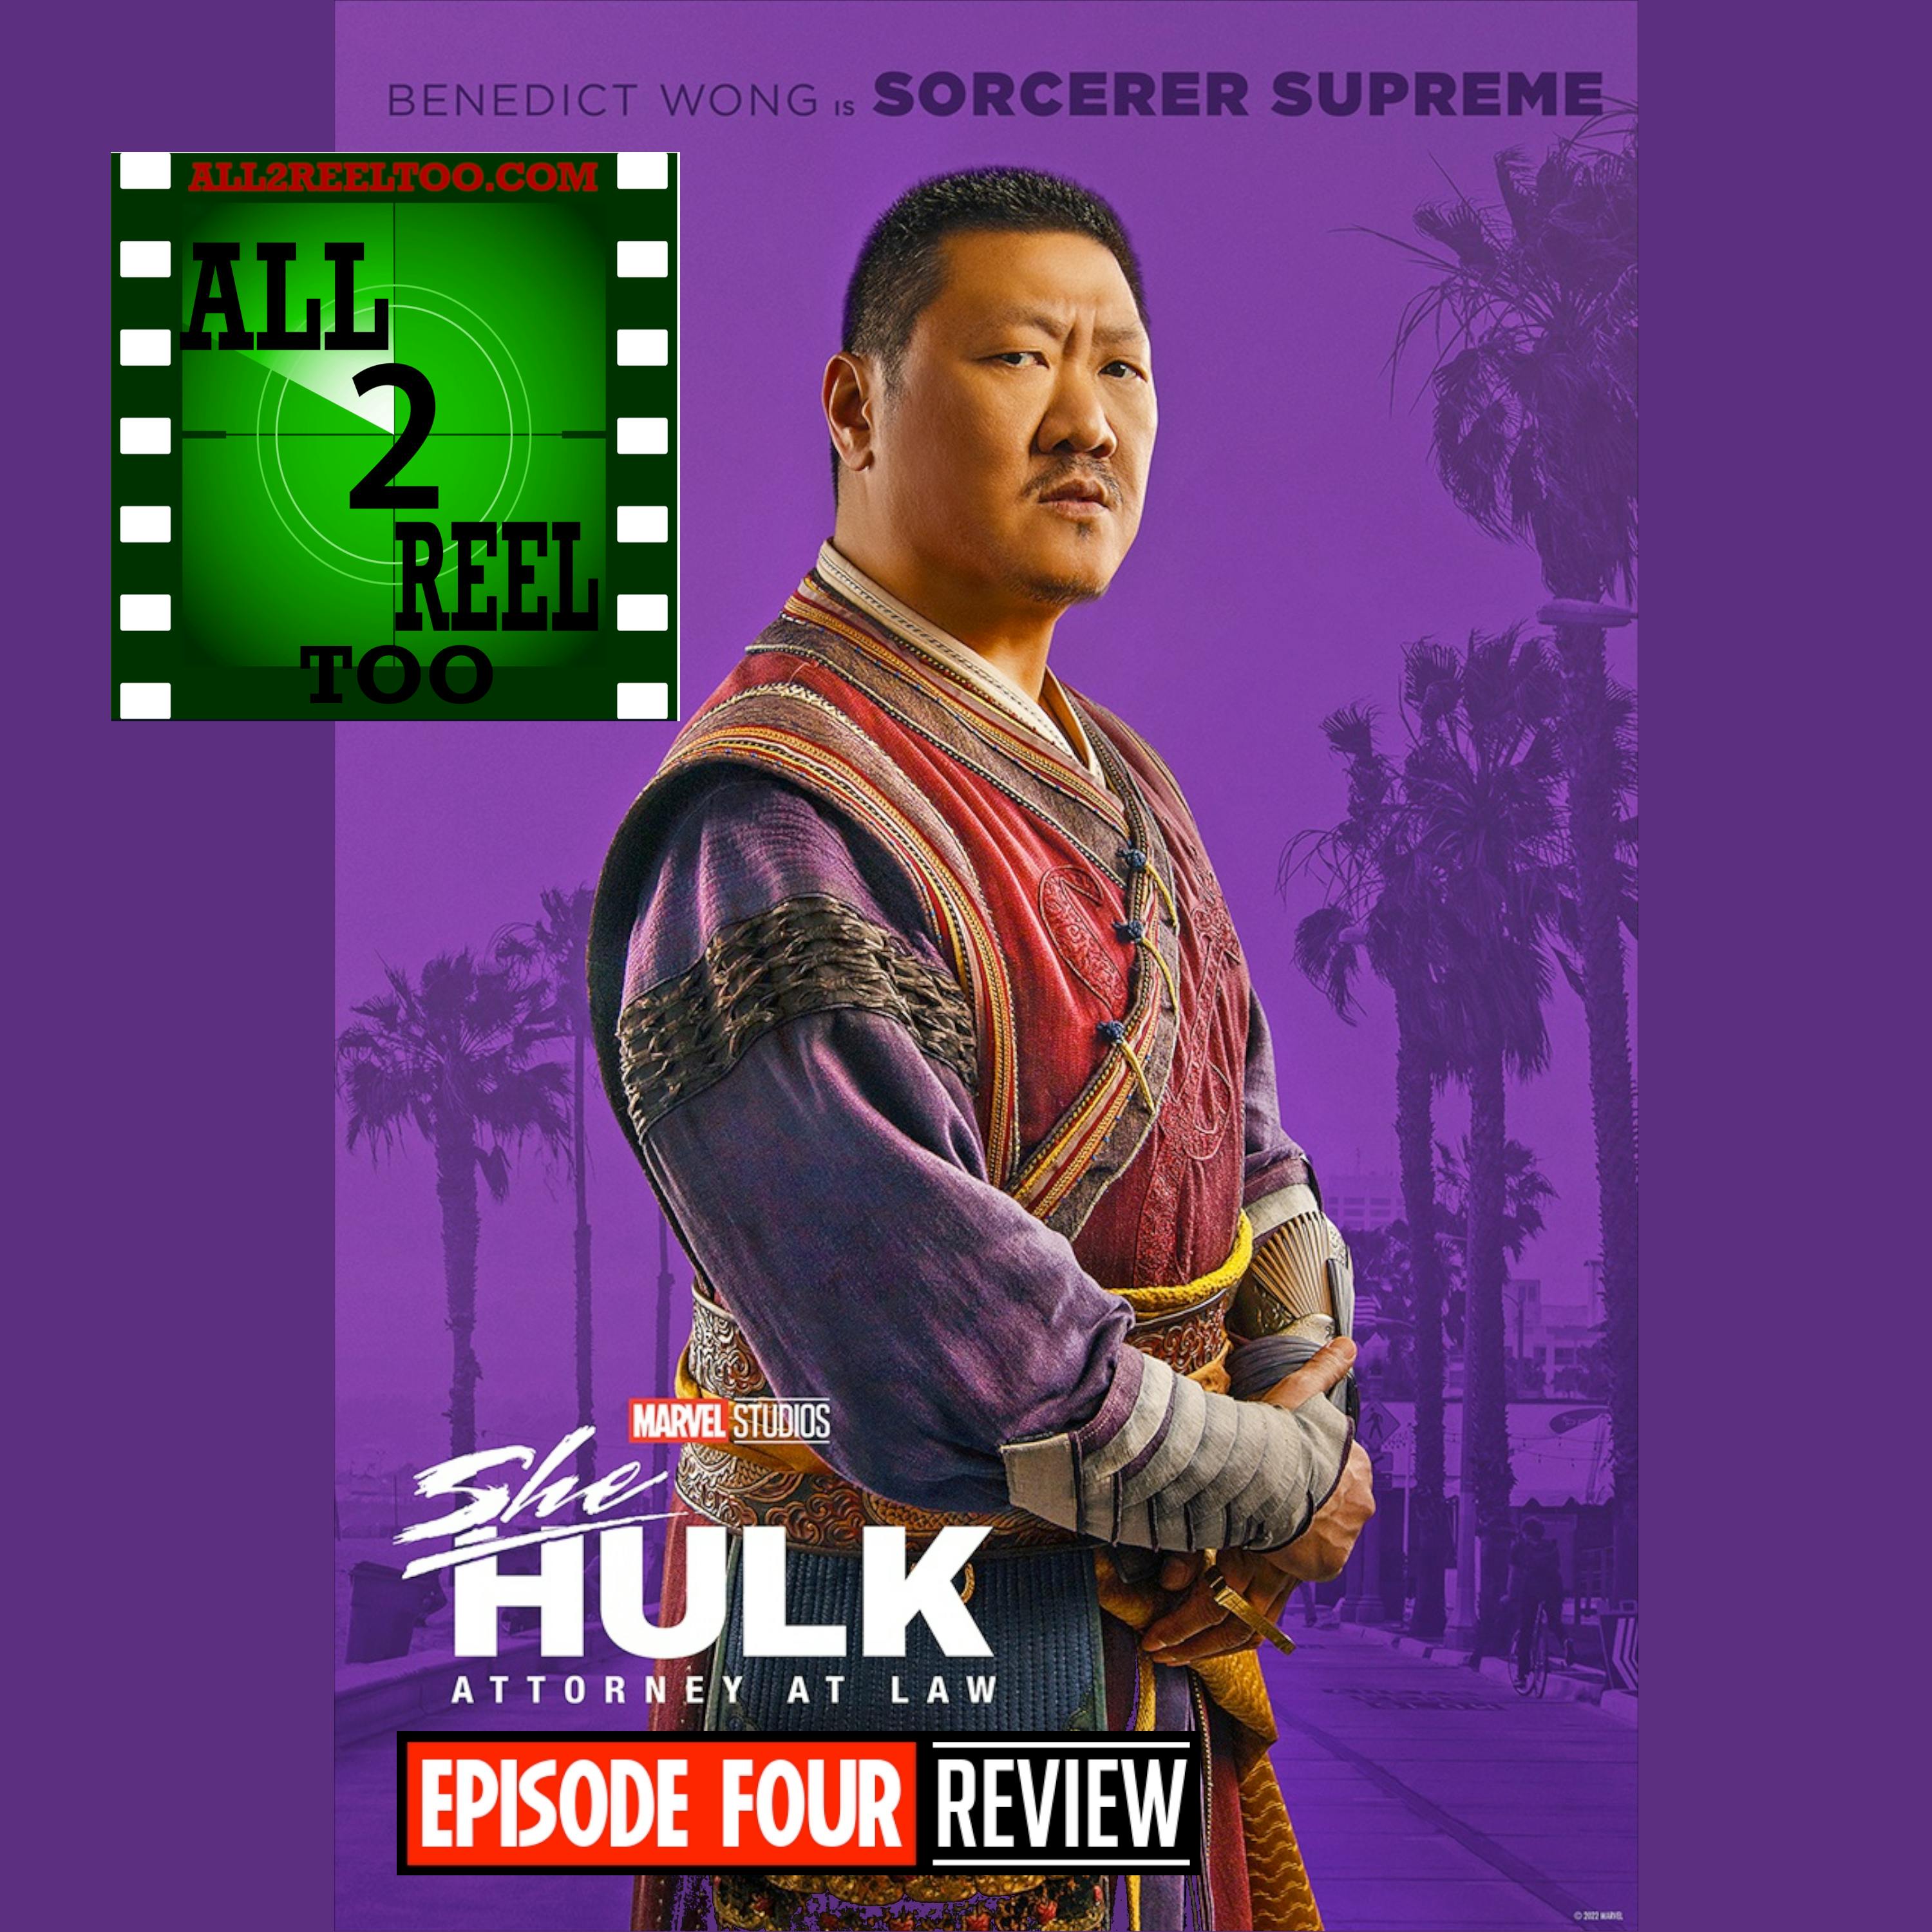 She-Hulk: Attorney at Law - EPISODE 4 REVIEW